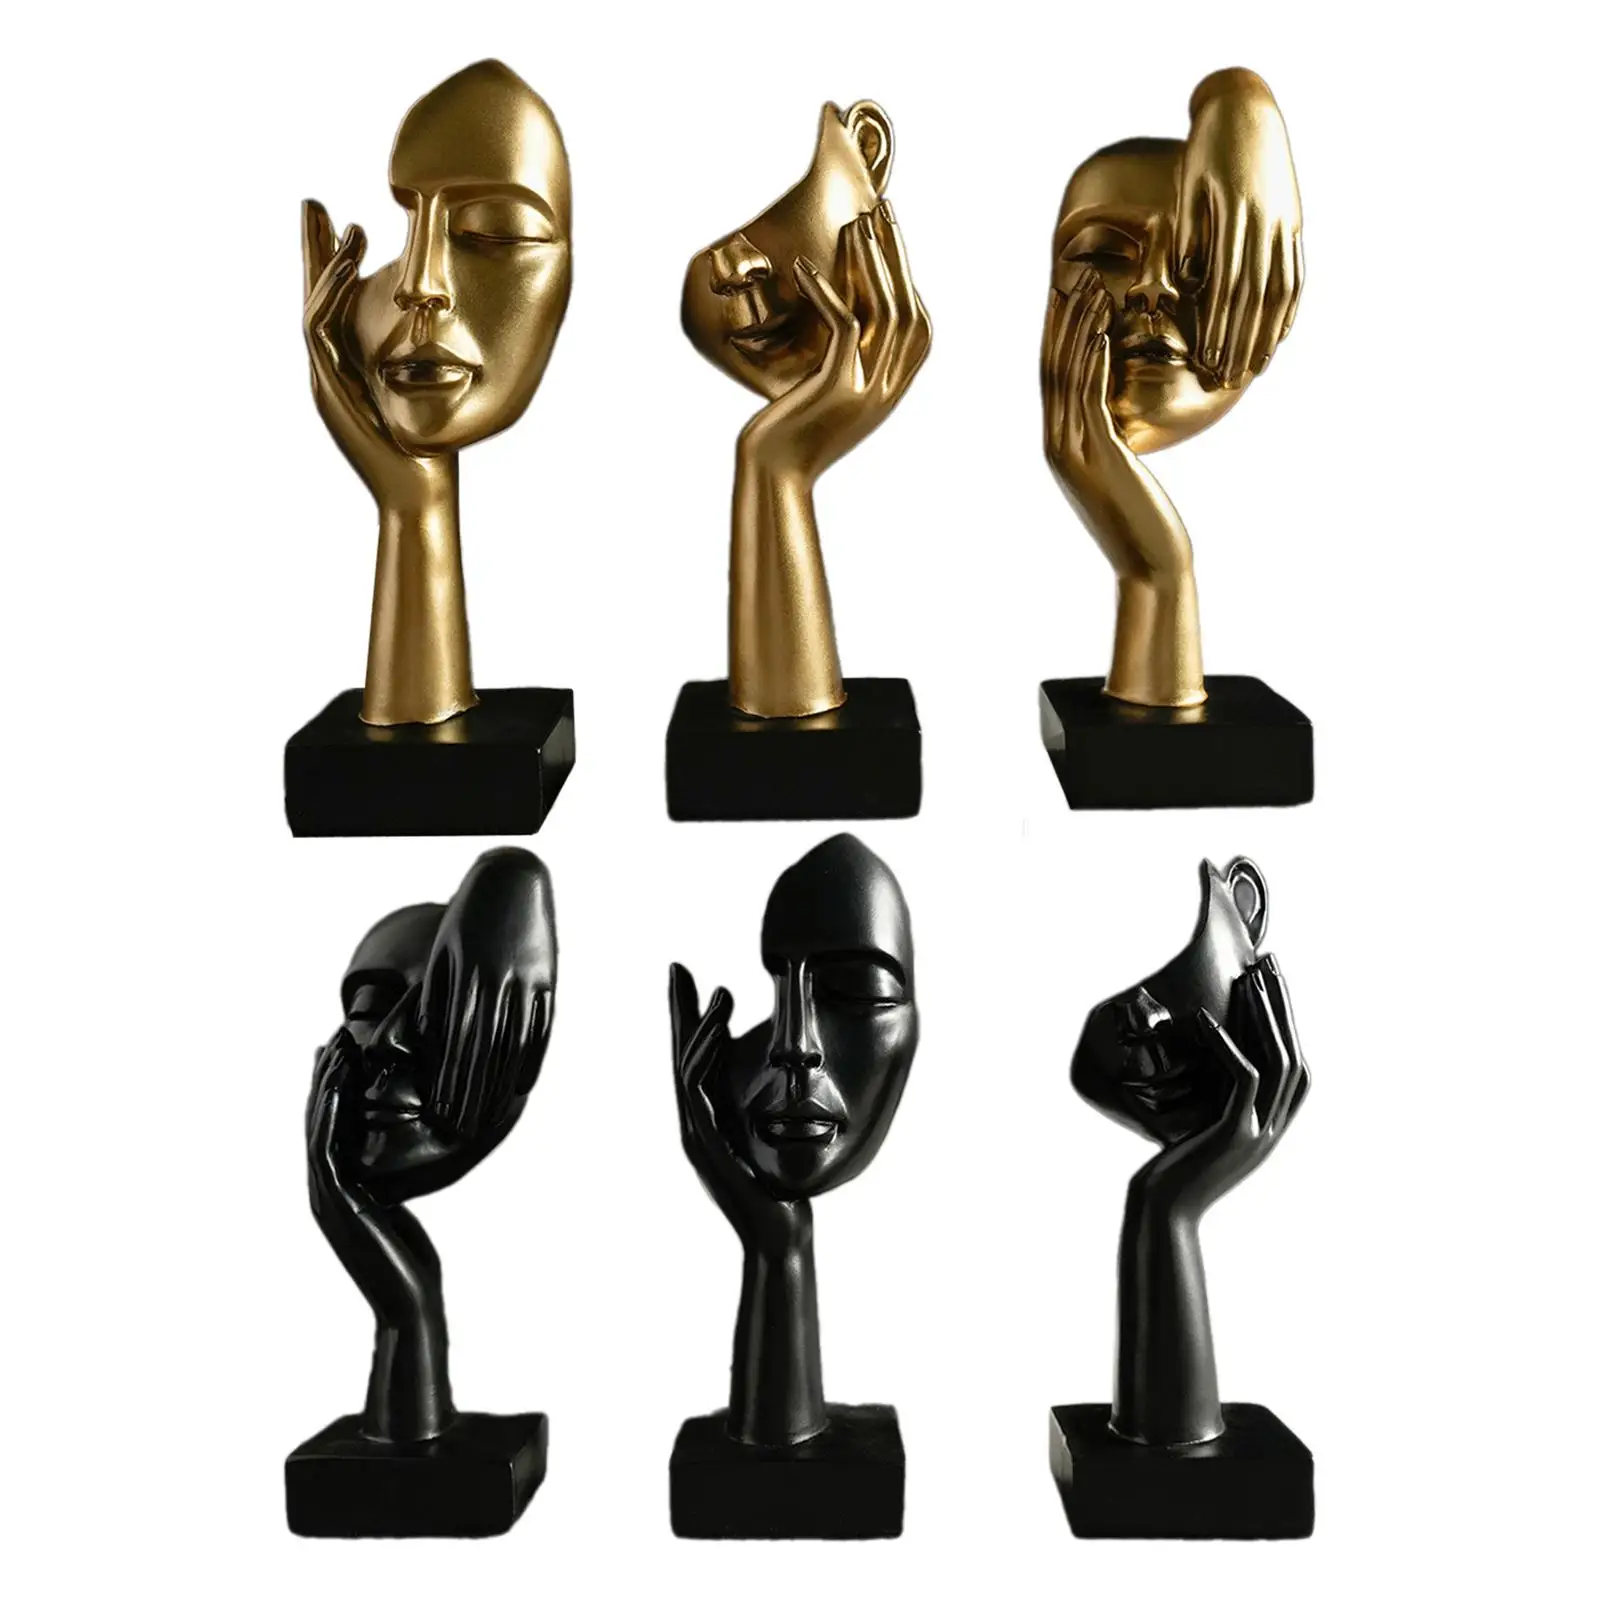 

3Pcs Thinker Statues Creative Collectible Centerpieces Desktop Decorations for Office Shelf Living Room Entryway Home Decor